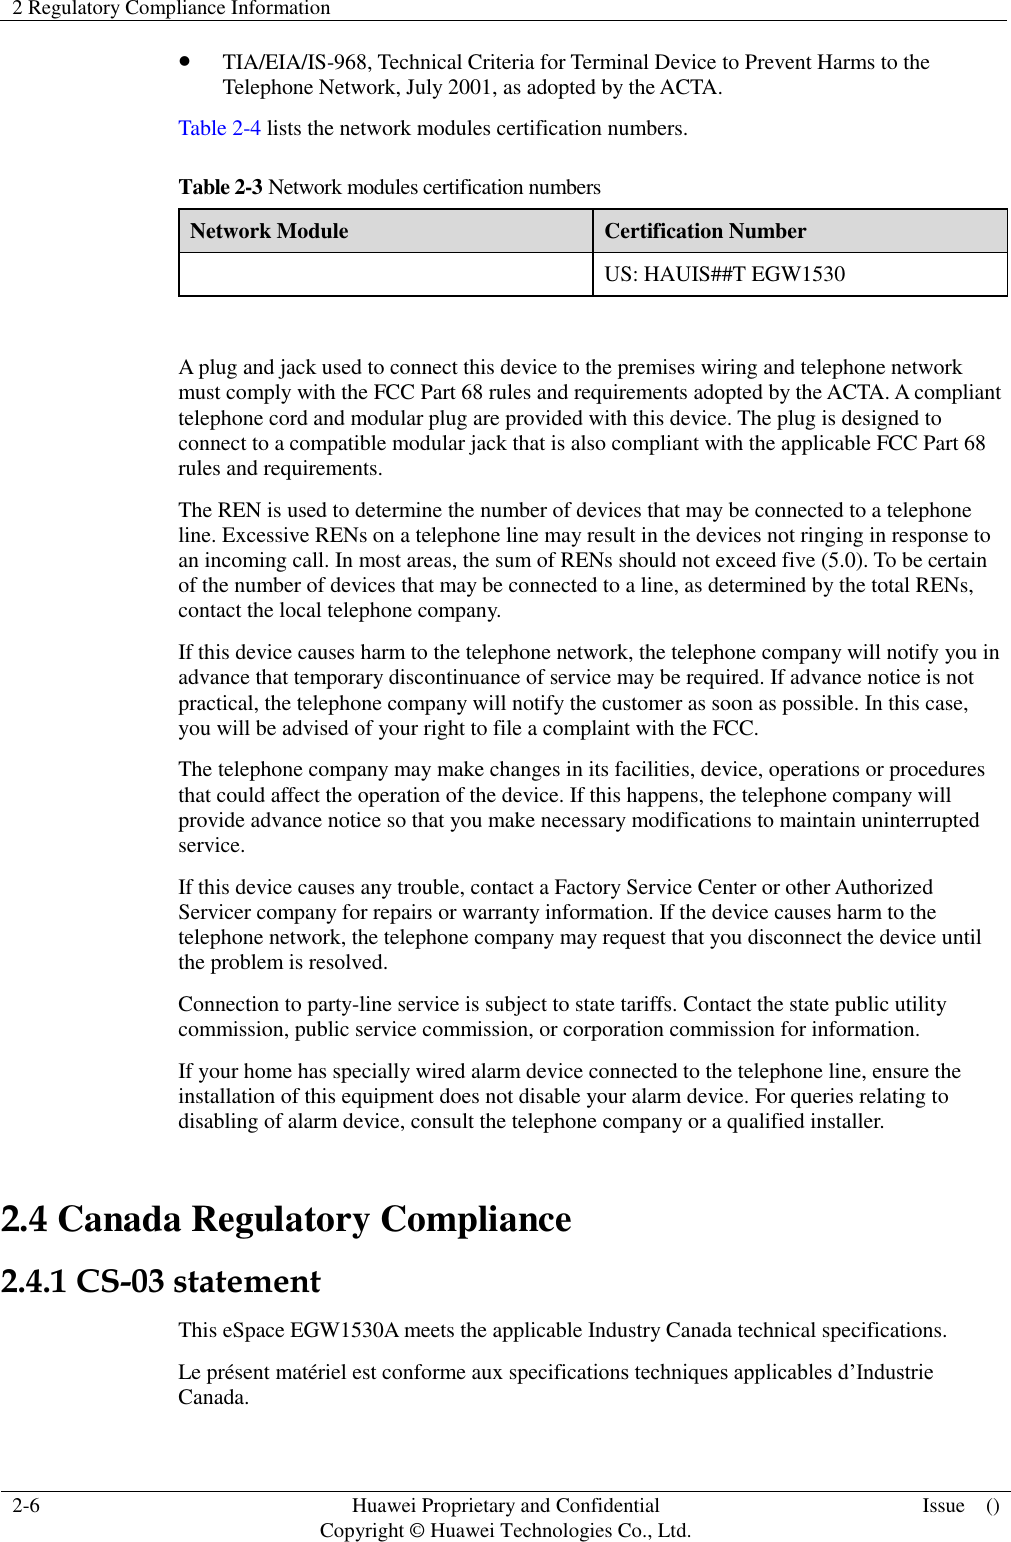 2 Regulatory Compliance Information    2-6 Huawei Proprietary and Confidential                                     Copyright © Huawei Technologies Co., Ltd. Issue    ()   TIA/EIA/IS-968, Technical Criteria for Terminal Device to Prevent Harms to the Telephone Network, July 2001, as adopted by the ACTA. Table 2-4 lists the network modules certification numbers. Table 2-3 Network modules certification numbers Network Module Certification Number  US: HAUIS##T EGW1530  A plug and jack used to connect this device to the premises wiring and telephone network must comply with the FCC Part 68 rules and requirements adopted by the ACTA. A compliant telephone cord and modular plug are provided with this device. The plug is designed to connect to a compatible modular jack that is also compliant with the applicable FCC Part 68 rules and requirements. The REN is used to determine the number of devices that may be connected to a telephone line. Excessive RENs on a telephone line may result in the devices not ringing in response to an incoming call. In most areas, the sum of RENs should not exceed five (5.0). To be certain of the number of devices that may be connected to a line, as determined by the total RENs, contact the local telephone company.   If this device causes harm to the telephone network, the telephone company will notify you in advance that temporary discontinuance of service may be required. If advance notice is not practical, the telephone company will notify the customer as soon as possible. In this case, you will be advised of your right to file a complaint with the FCC. The telephone company may make changes in its facilities, device, operations or procedures that could affect the operation of the device. If this happens, the telephone company will provide advance notice so that you make necessary modifications to maintain uninterrupted service. If this device causes any trouble, contact a Factory Service Center or other Authorized Servicer company for repairs or warranty information. If the device causes harm to the telephone network, the telephone company may request that you disconnect the device until the problem is resolved. Connection to party-line service is subject to state tariffs. Contact the state public utility commission, public service commission, or corporation commission for information. If your home has specially wired alarm device connected to the telephone line, ensure the installation of this equipment does not disable your alarm device. For queries relating to disabling of alarm device, consult the telephone company or a qualified installer. 2.4 Canada Regulatory Compliance 2.4.1 CS-03 statement This eSpace EGW1530A meets the applicable Industry Canada technical specifications.   Le présent matériel est conforme aux specifications techniques applicables d’Industrie Canada. 